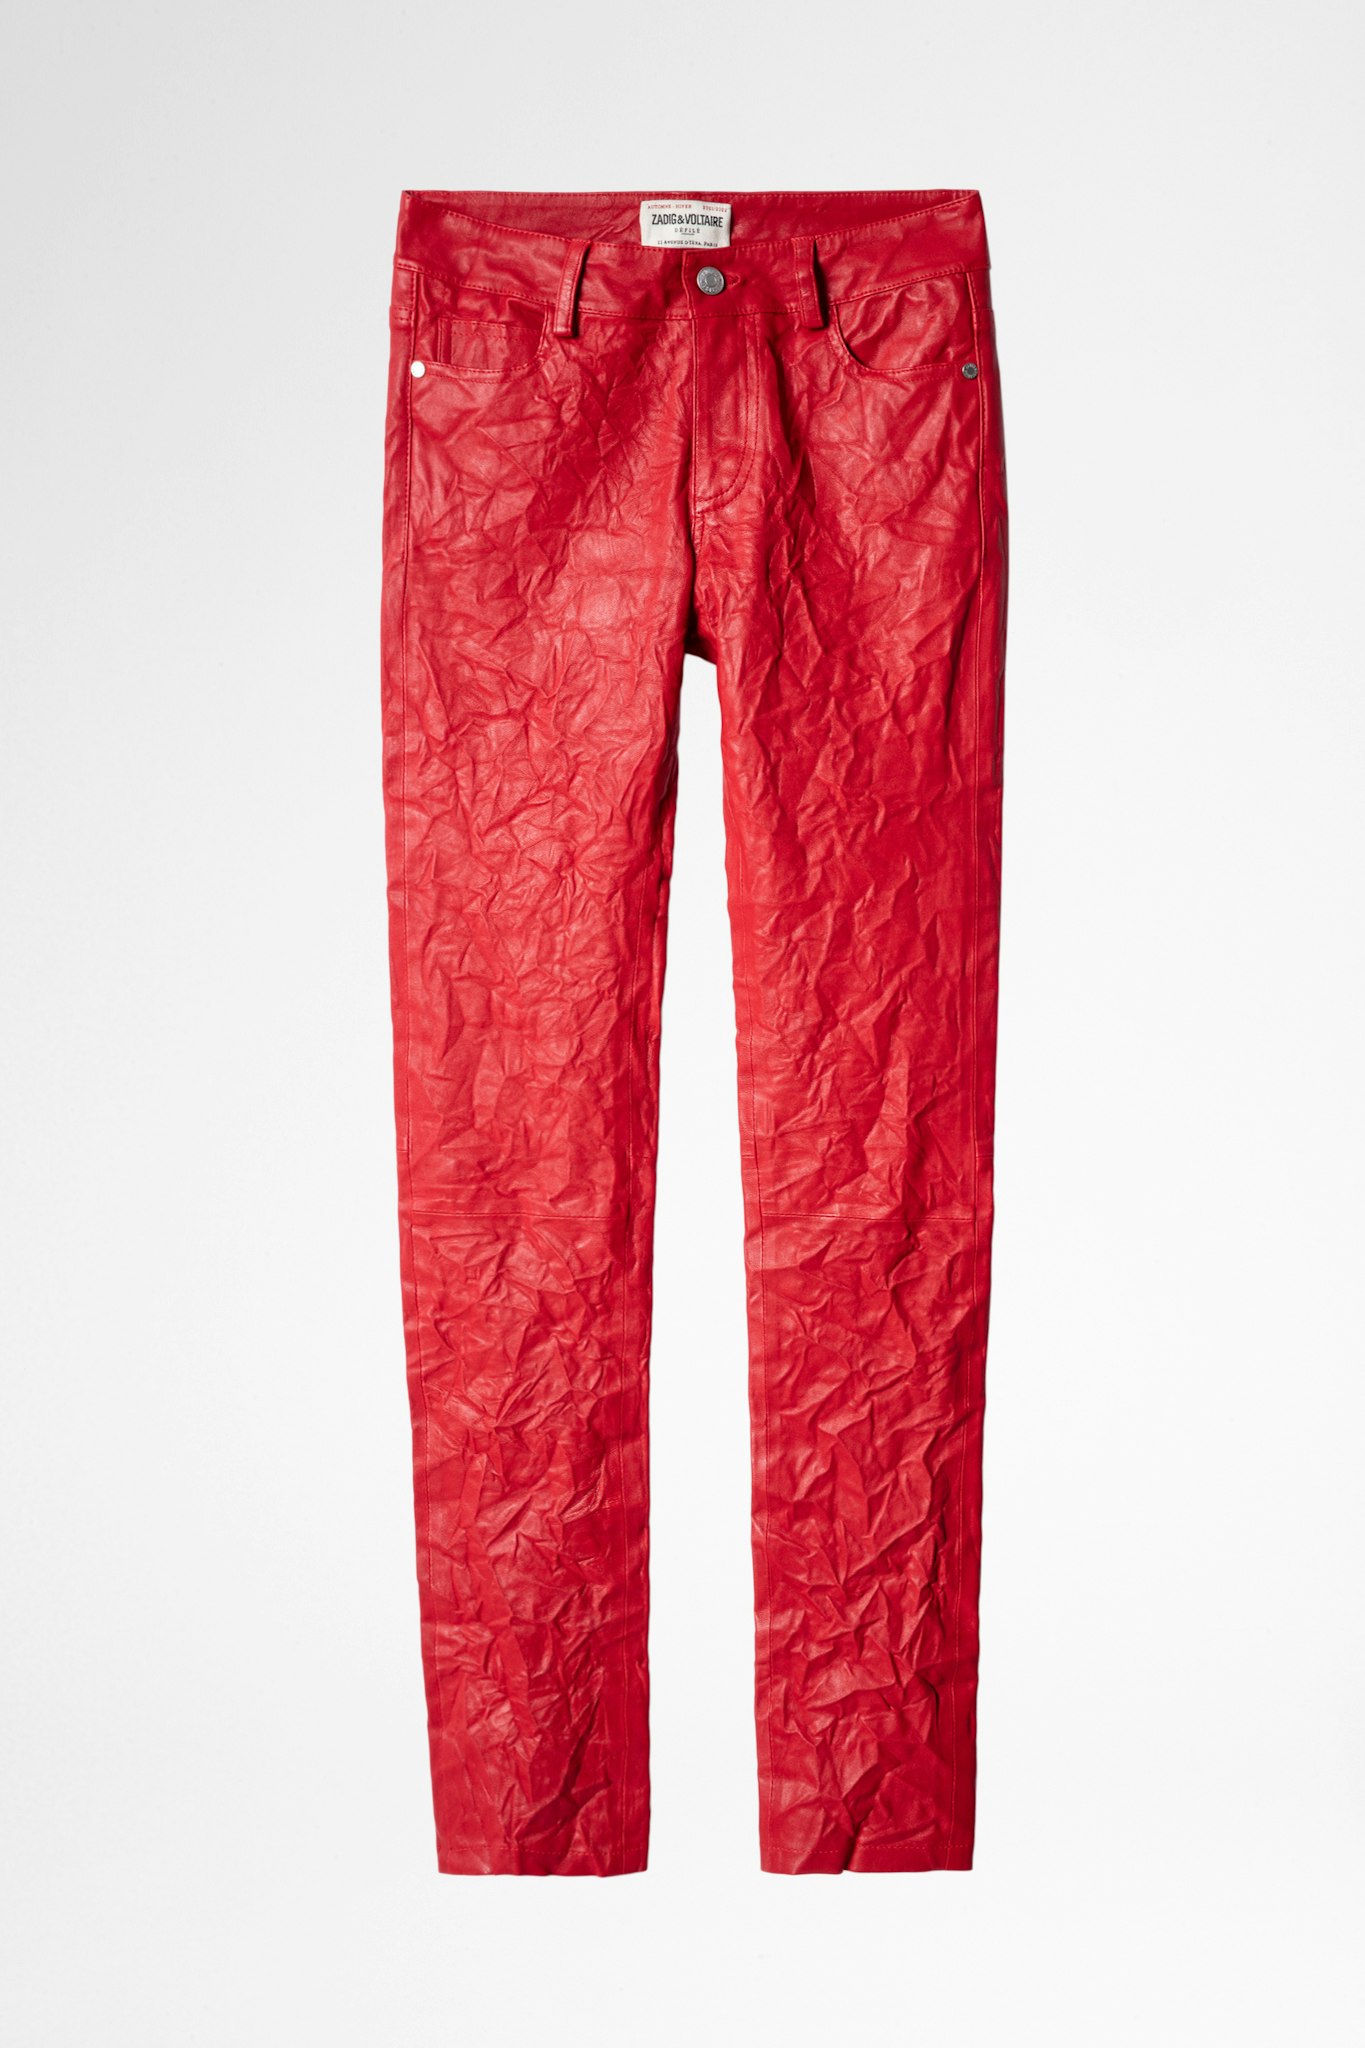 Phlame Pants Crinkled Leather